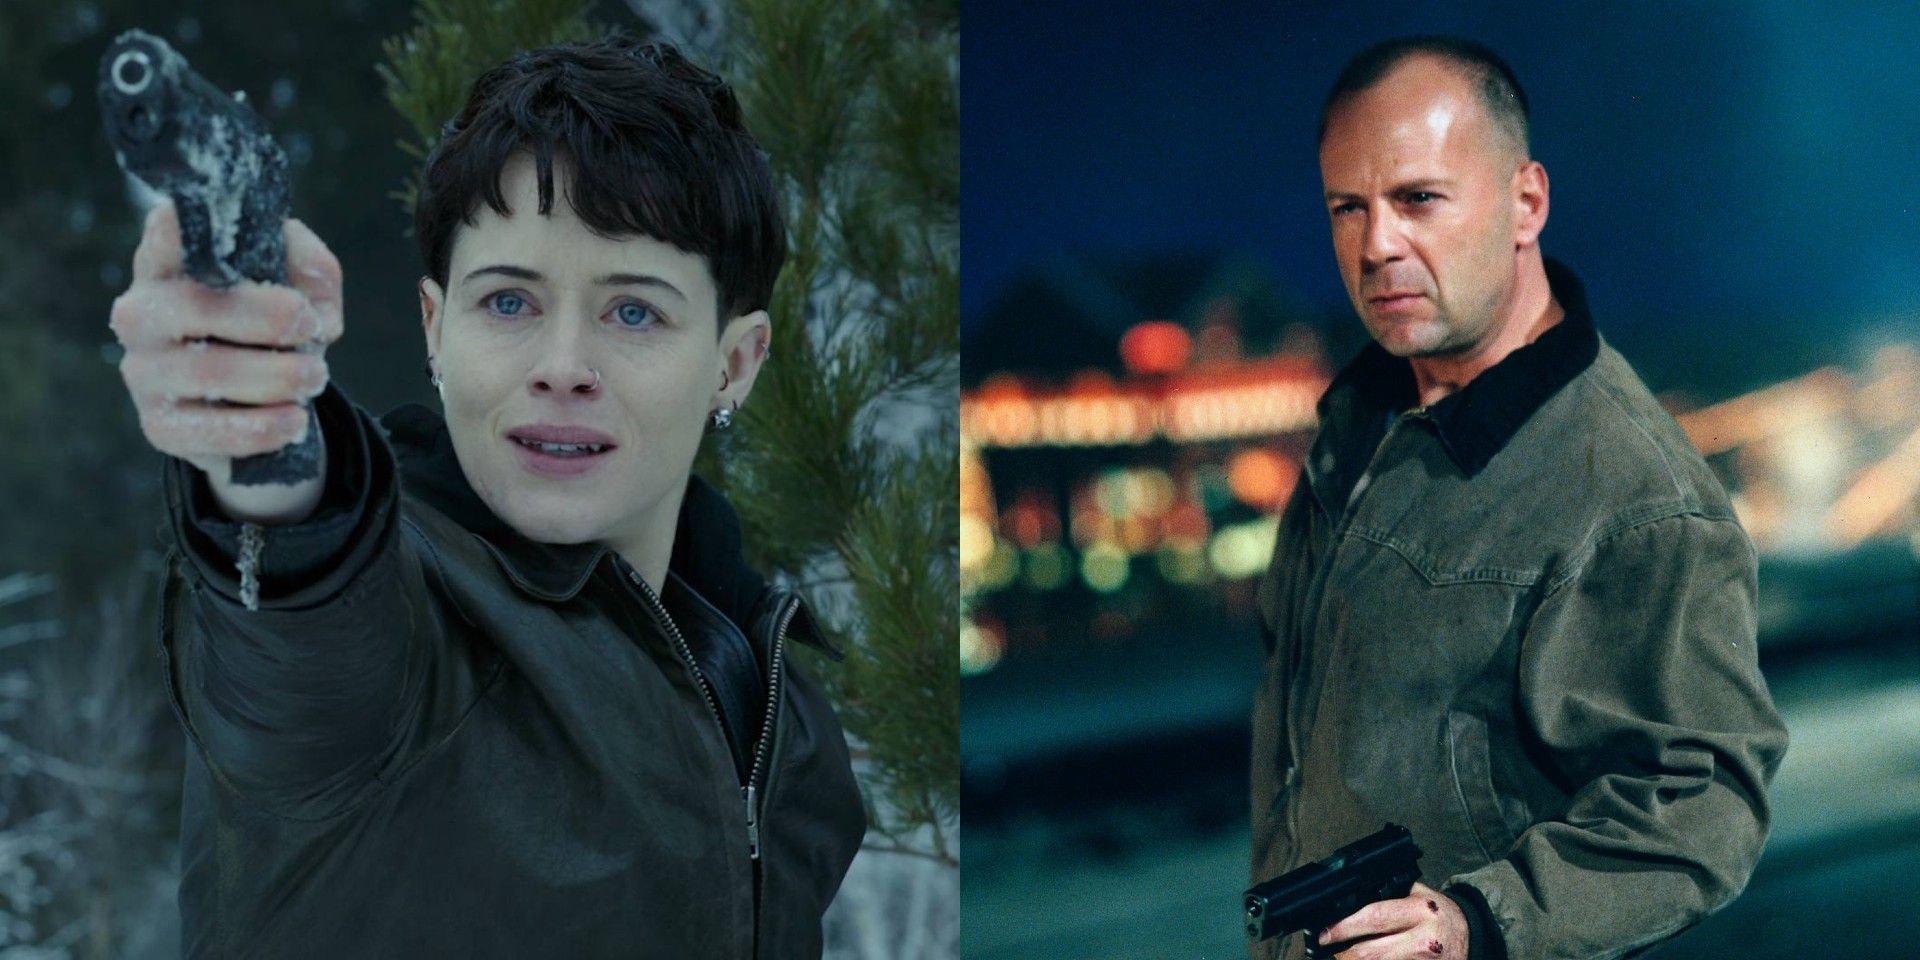 Claire Foy in The Girl In The Spider's Web; Bruce Willis in Mercury Rising